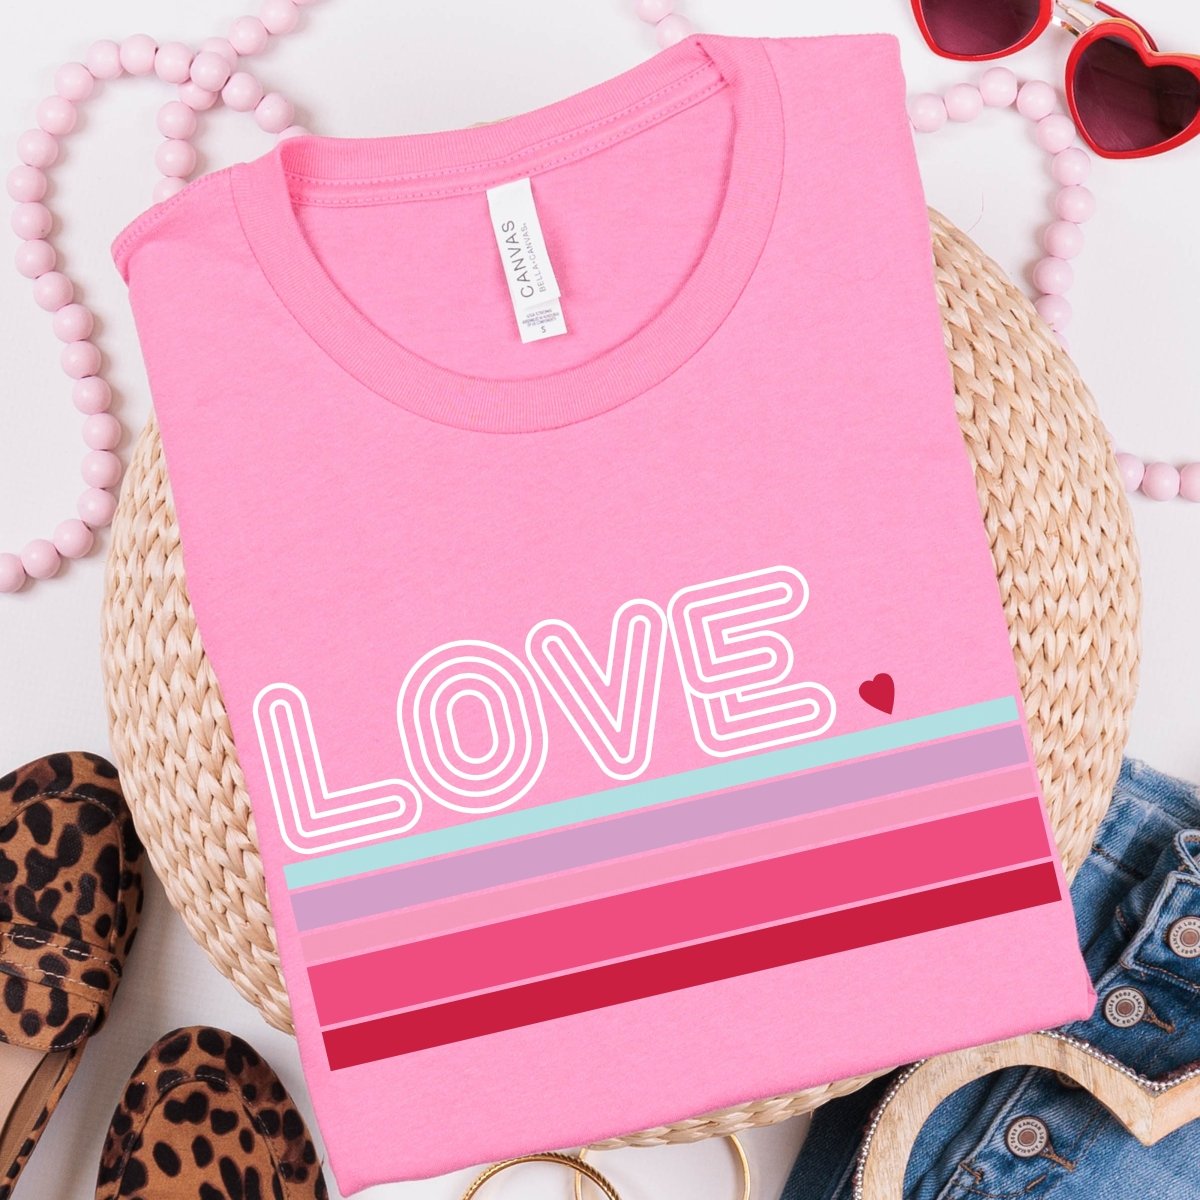 Loves Striped Wholesale Tee - Limeberry Designs